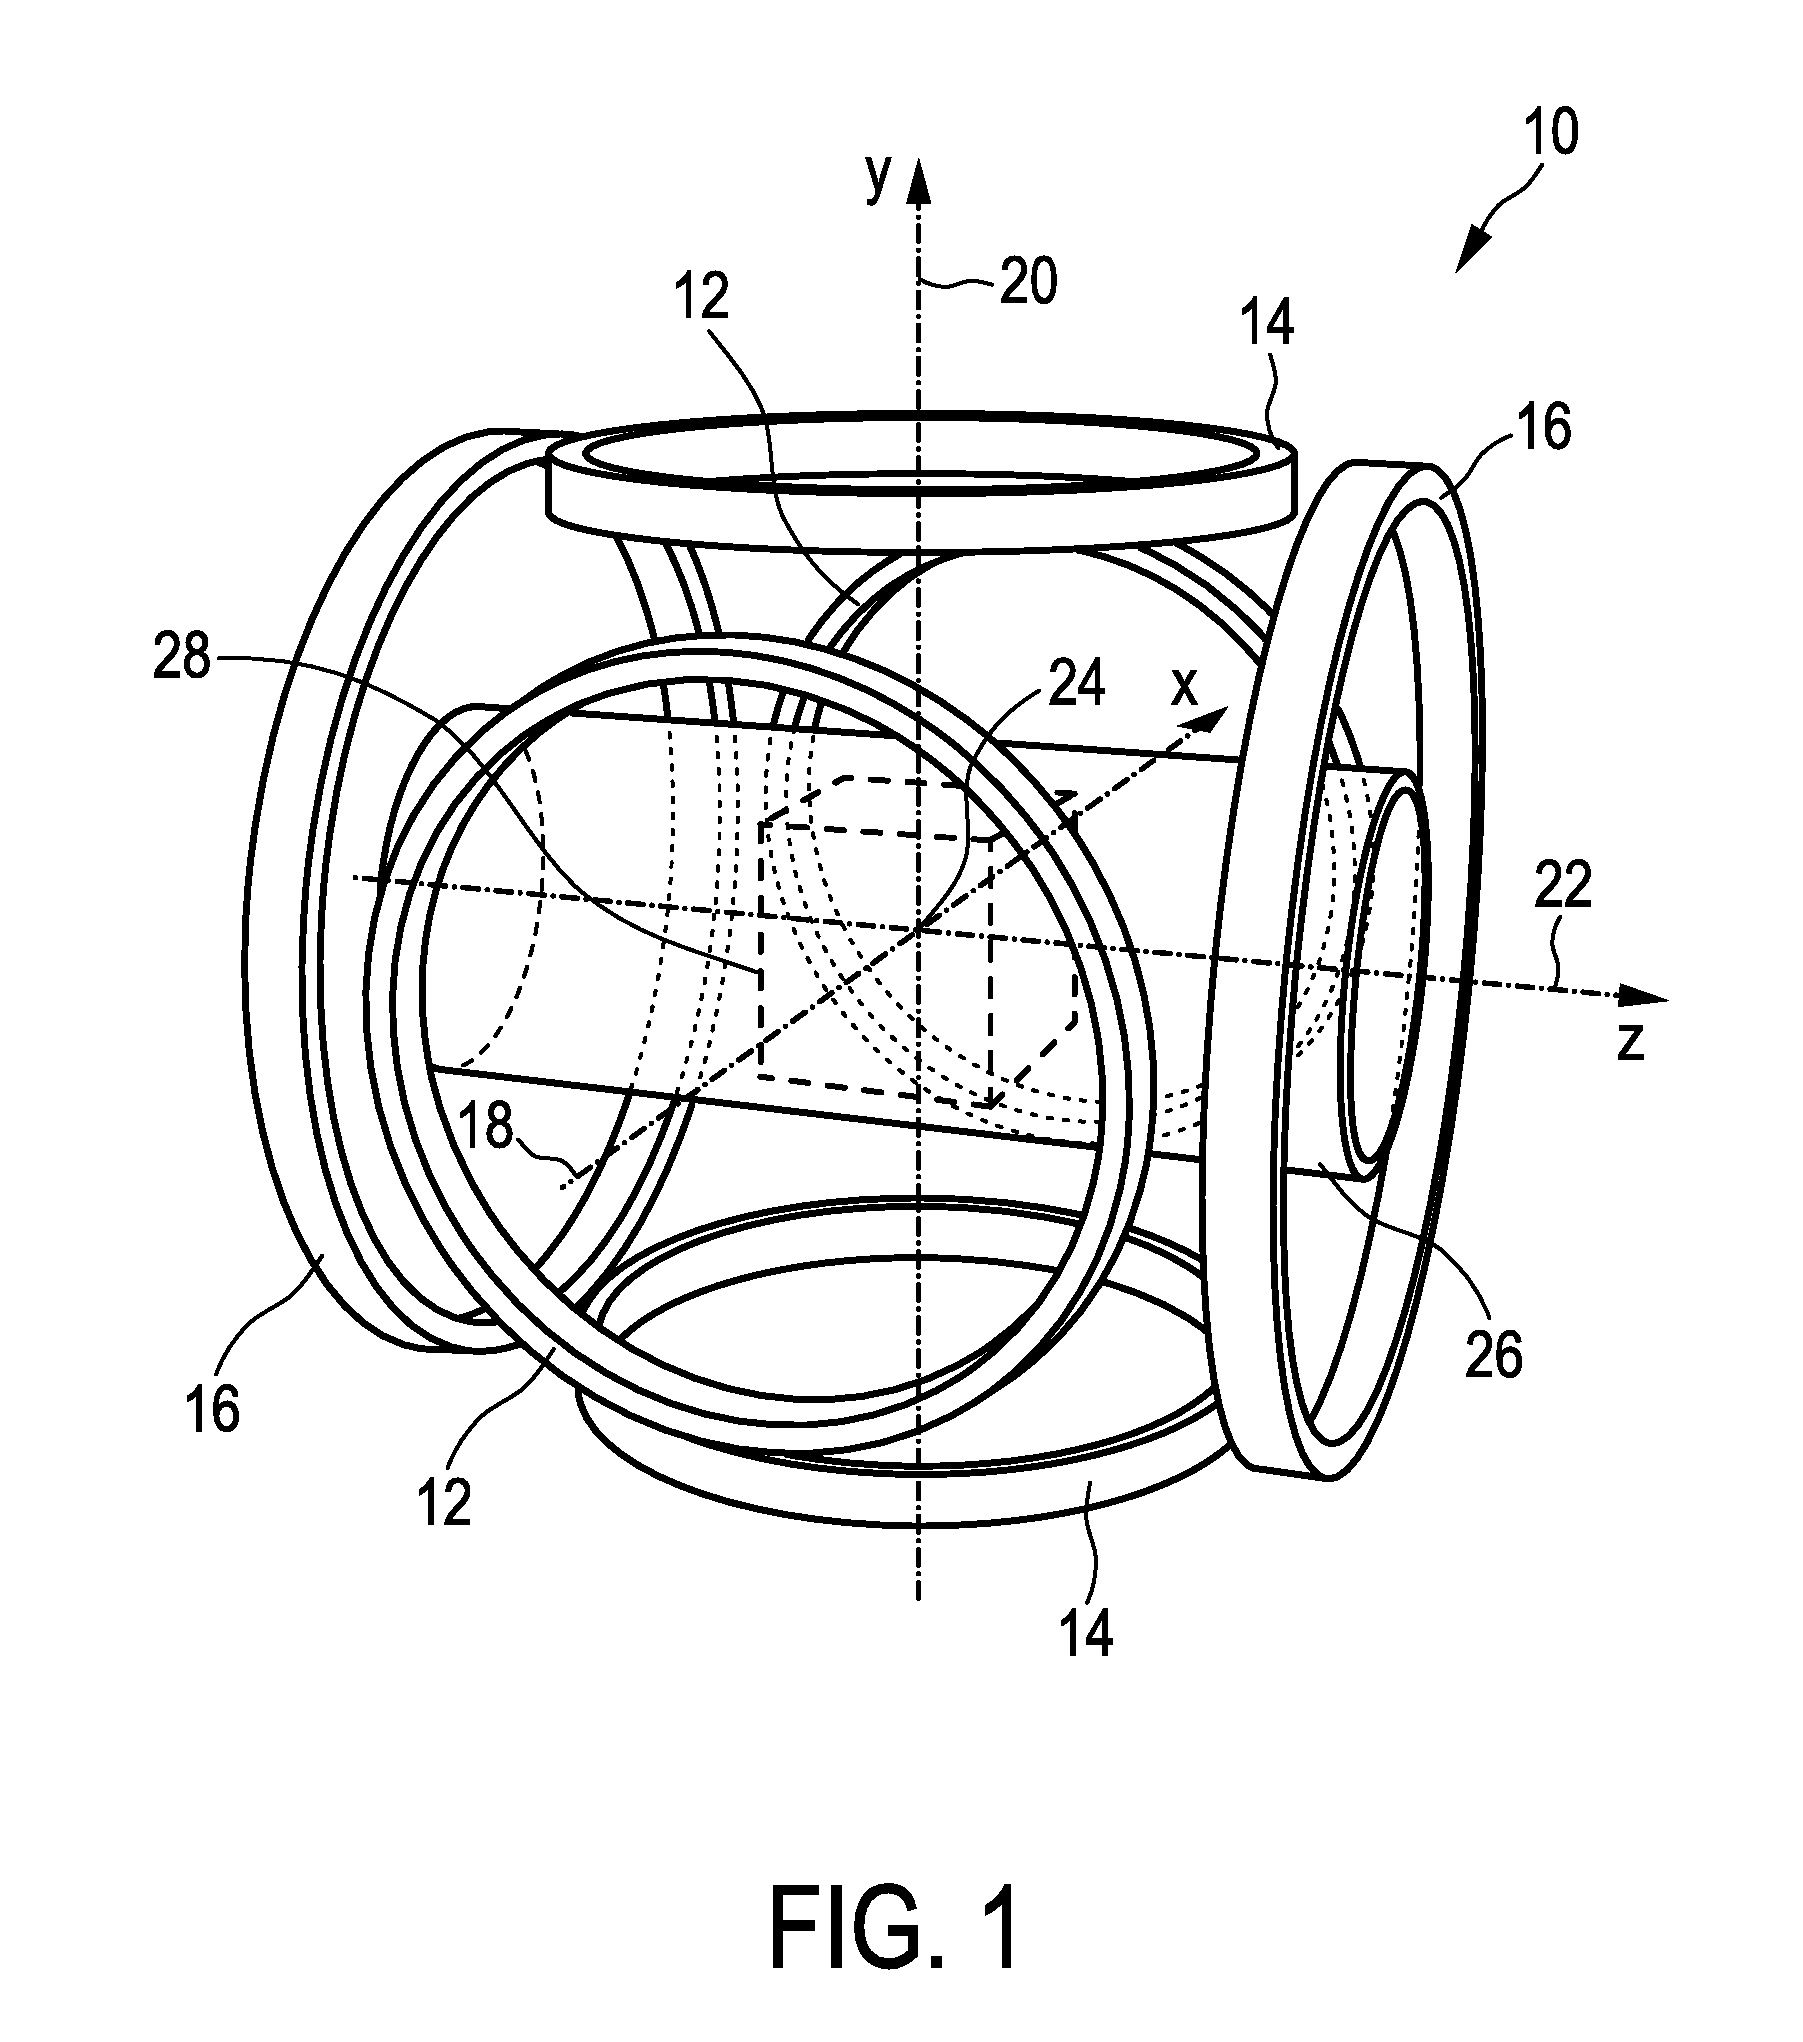 Apparatus and method for non-invasive intracardiac electrocardiography using mpi